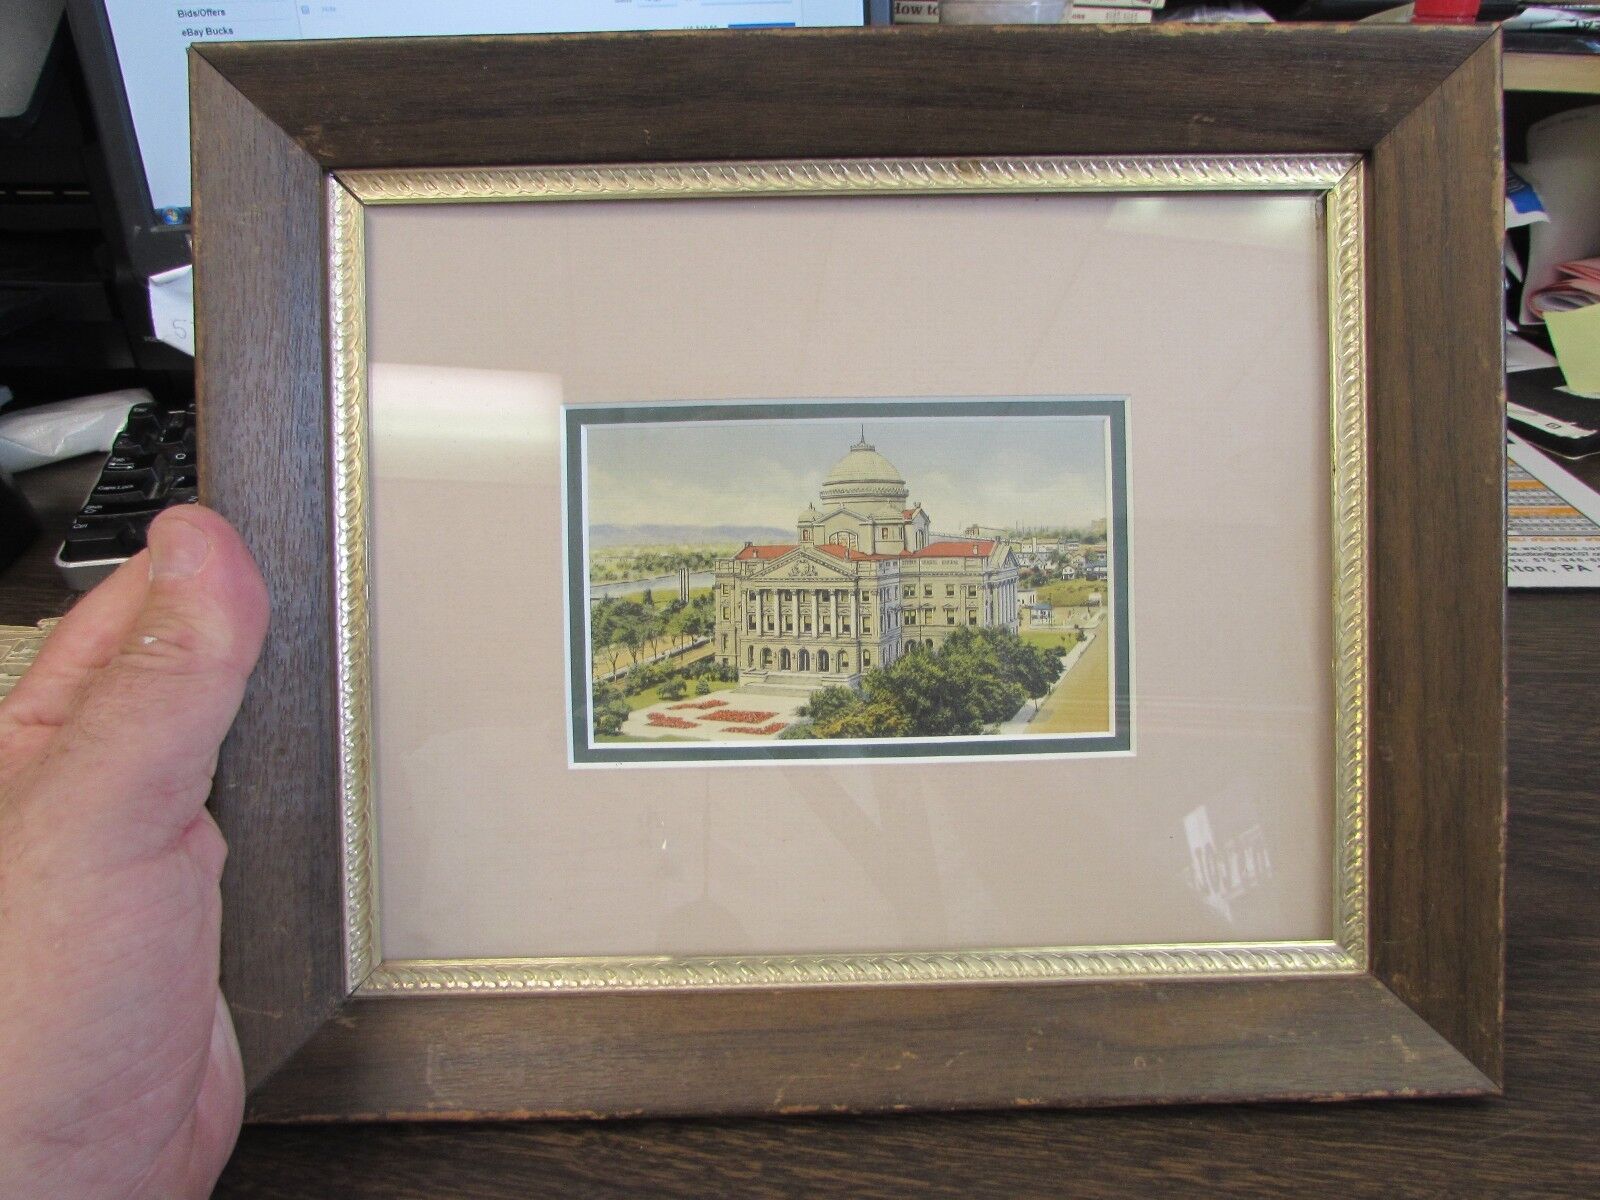 THE COURTHOUSE - WILKES-BARRE PA - FRAMED 11-3/4 BY 9-3/4 - VERY GOOD